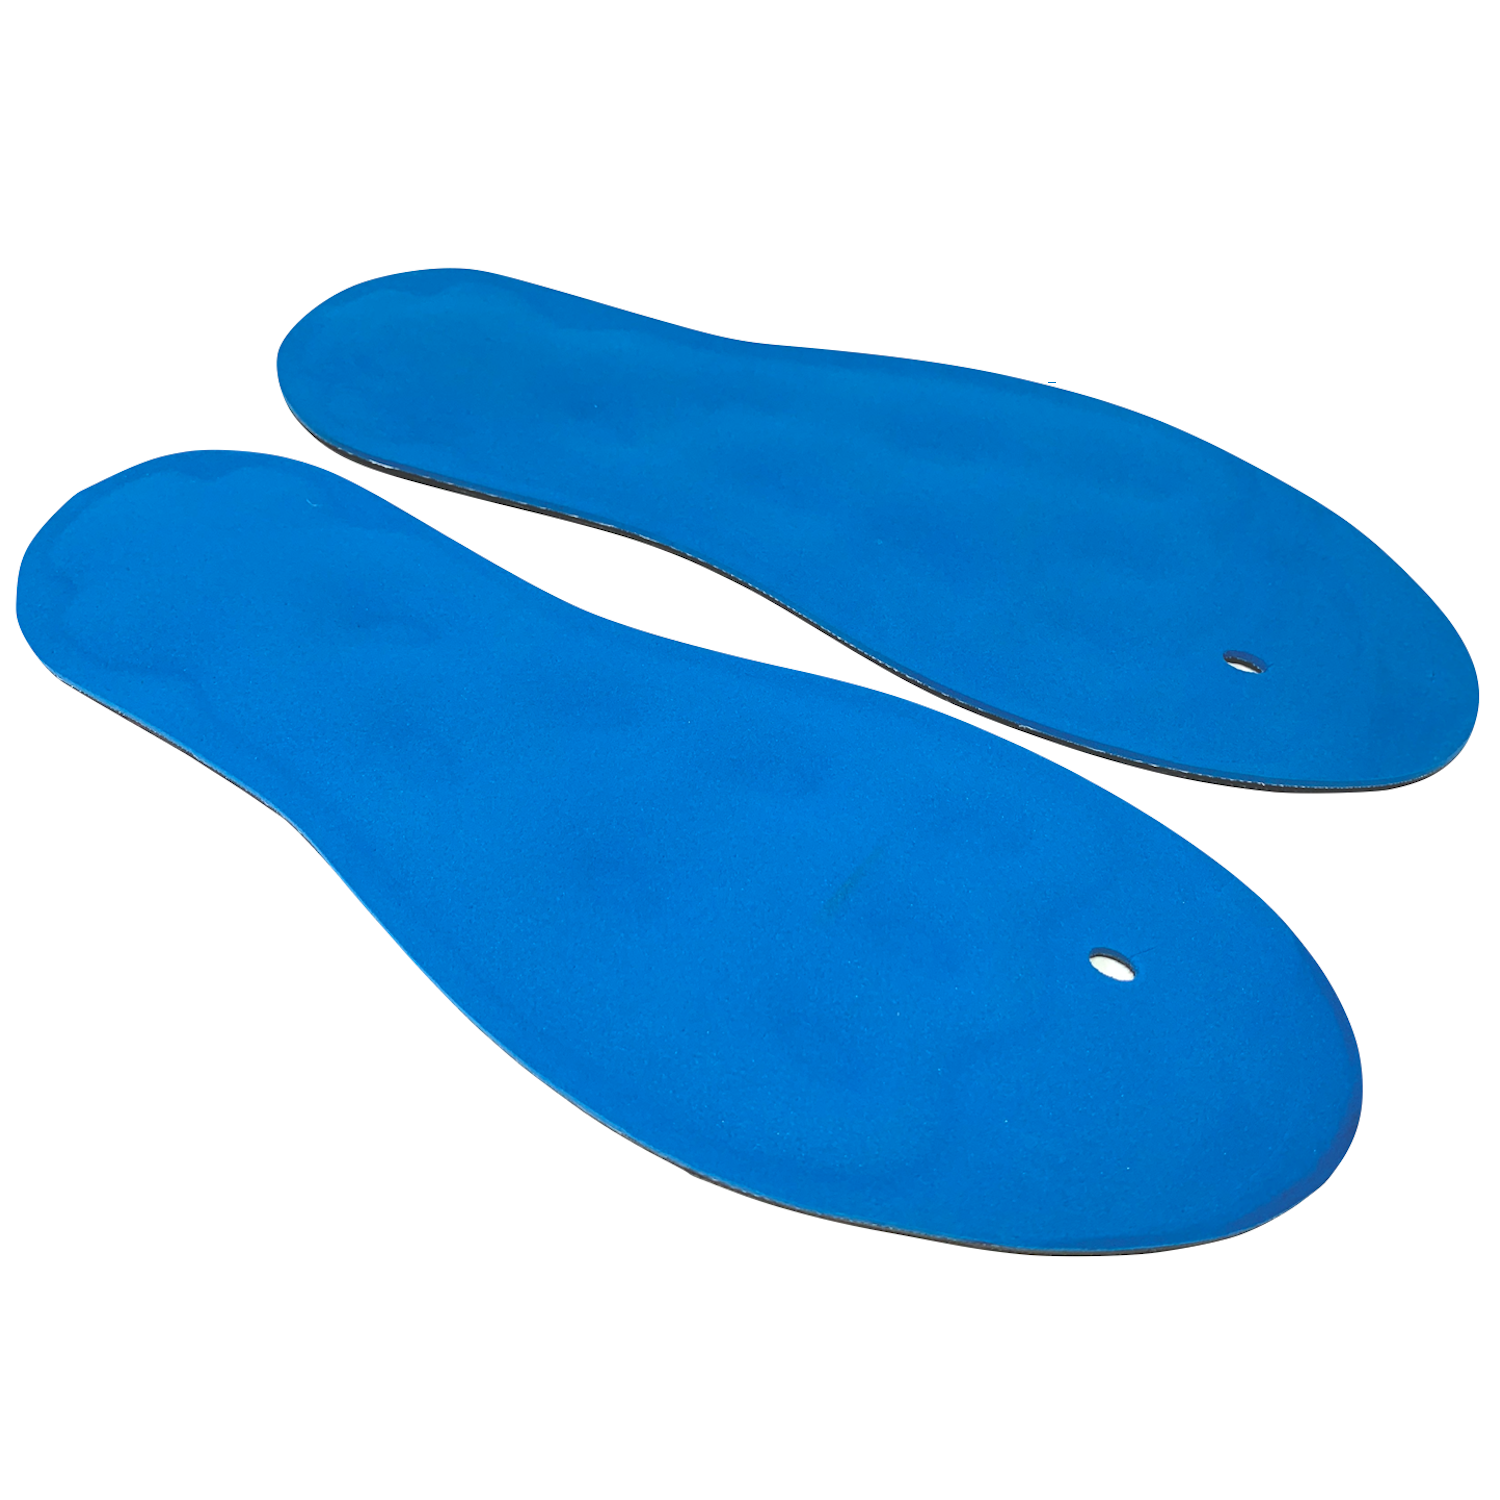 AIRfeet SPORT O2 Active Arch Support Plantar Fasciitis, Fatigue, Foot Pain SMALL - $39.95